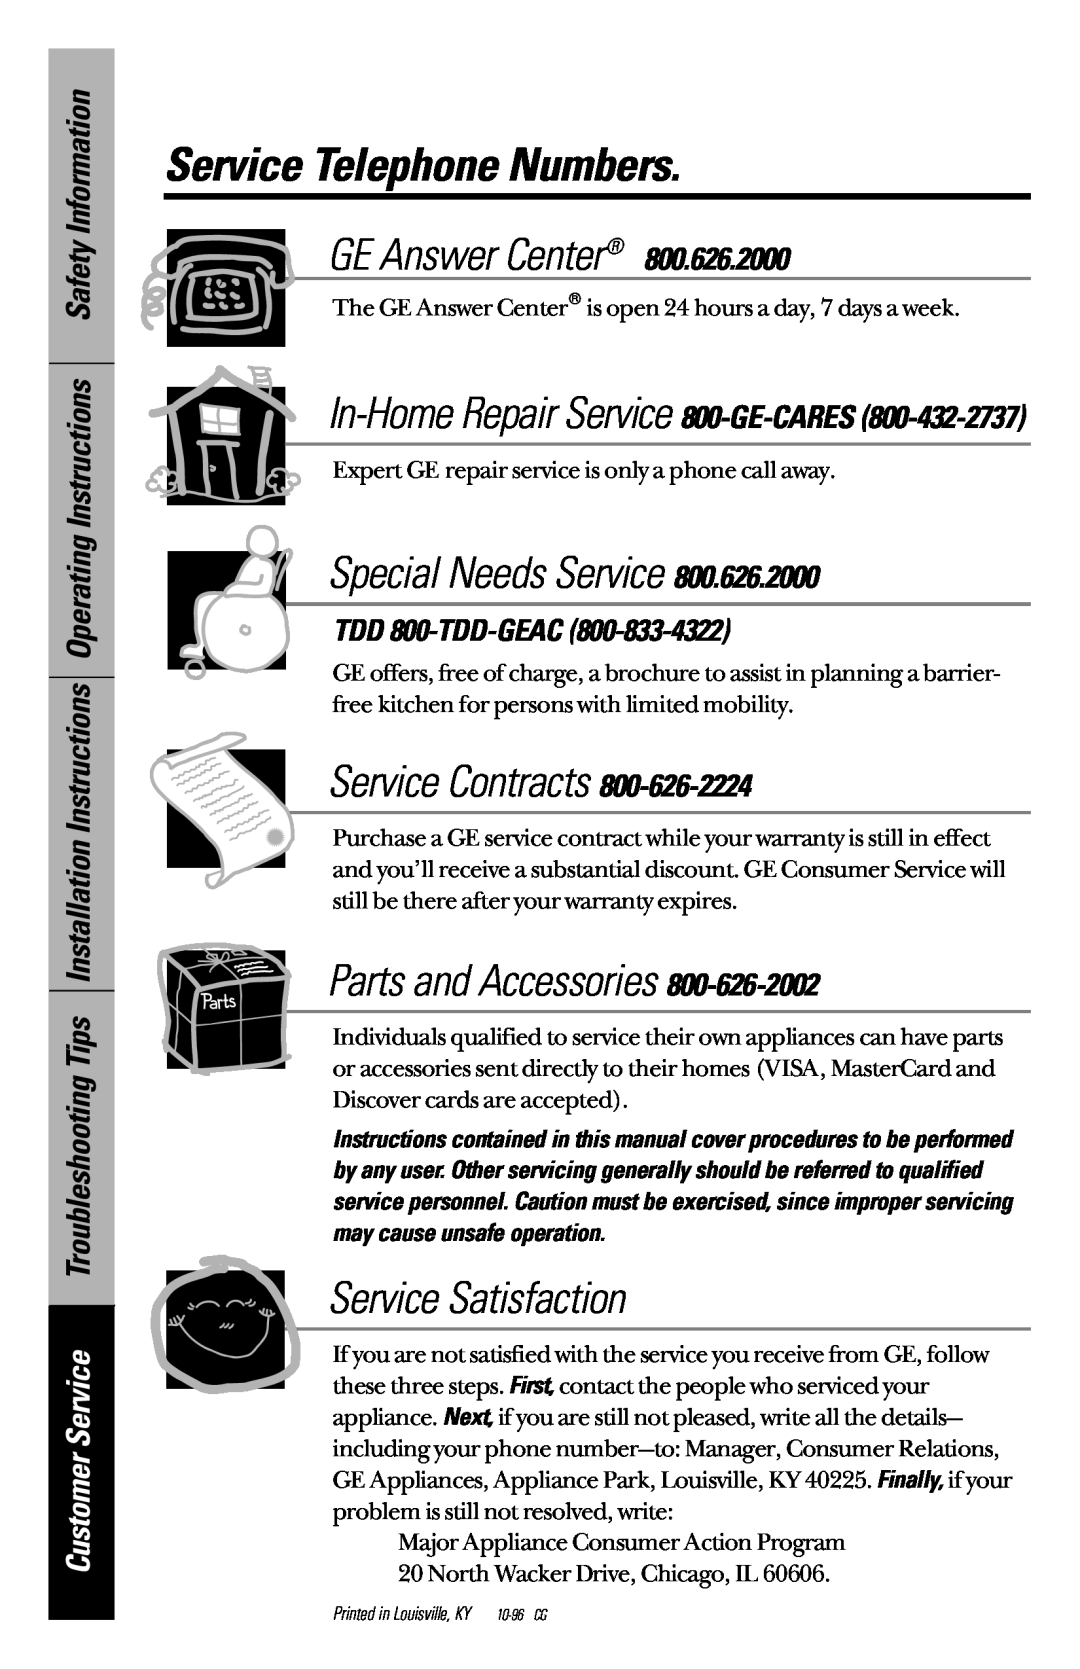 Hotpoint RB533, RB526 Service Telephone Numbers, In-Home Repair Service 800-GE-CARES, TDD 800-TDD-GEAC, GE Answer Center 